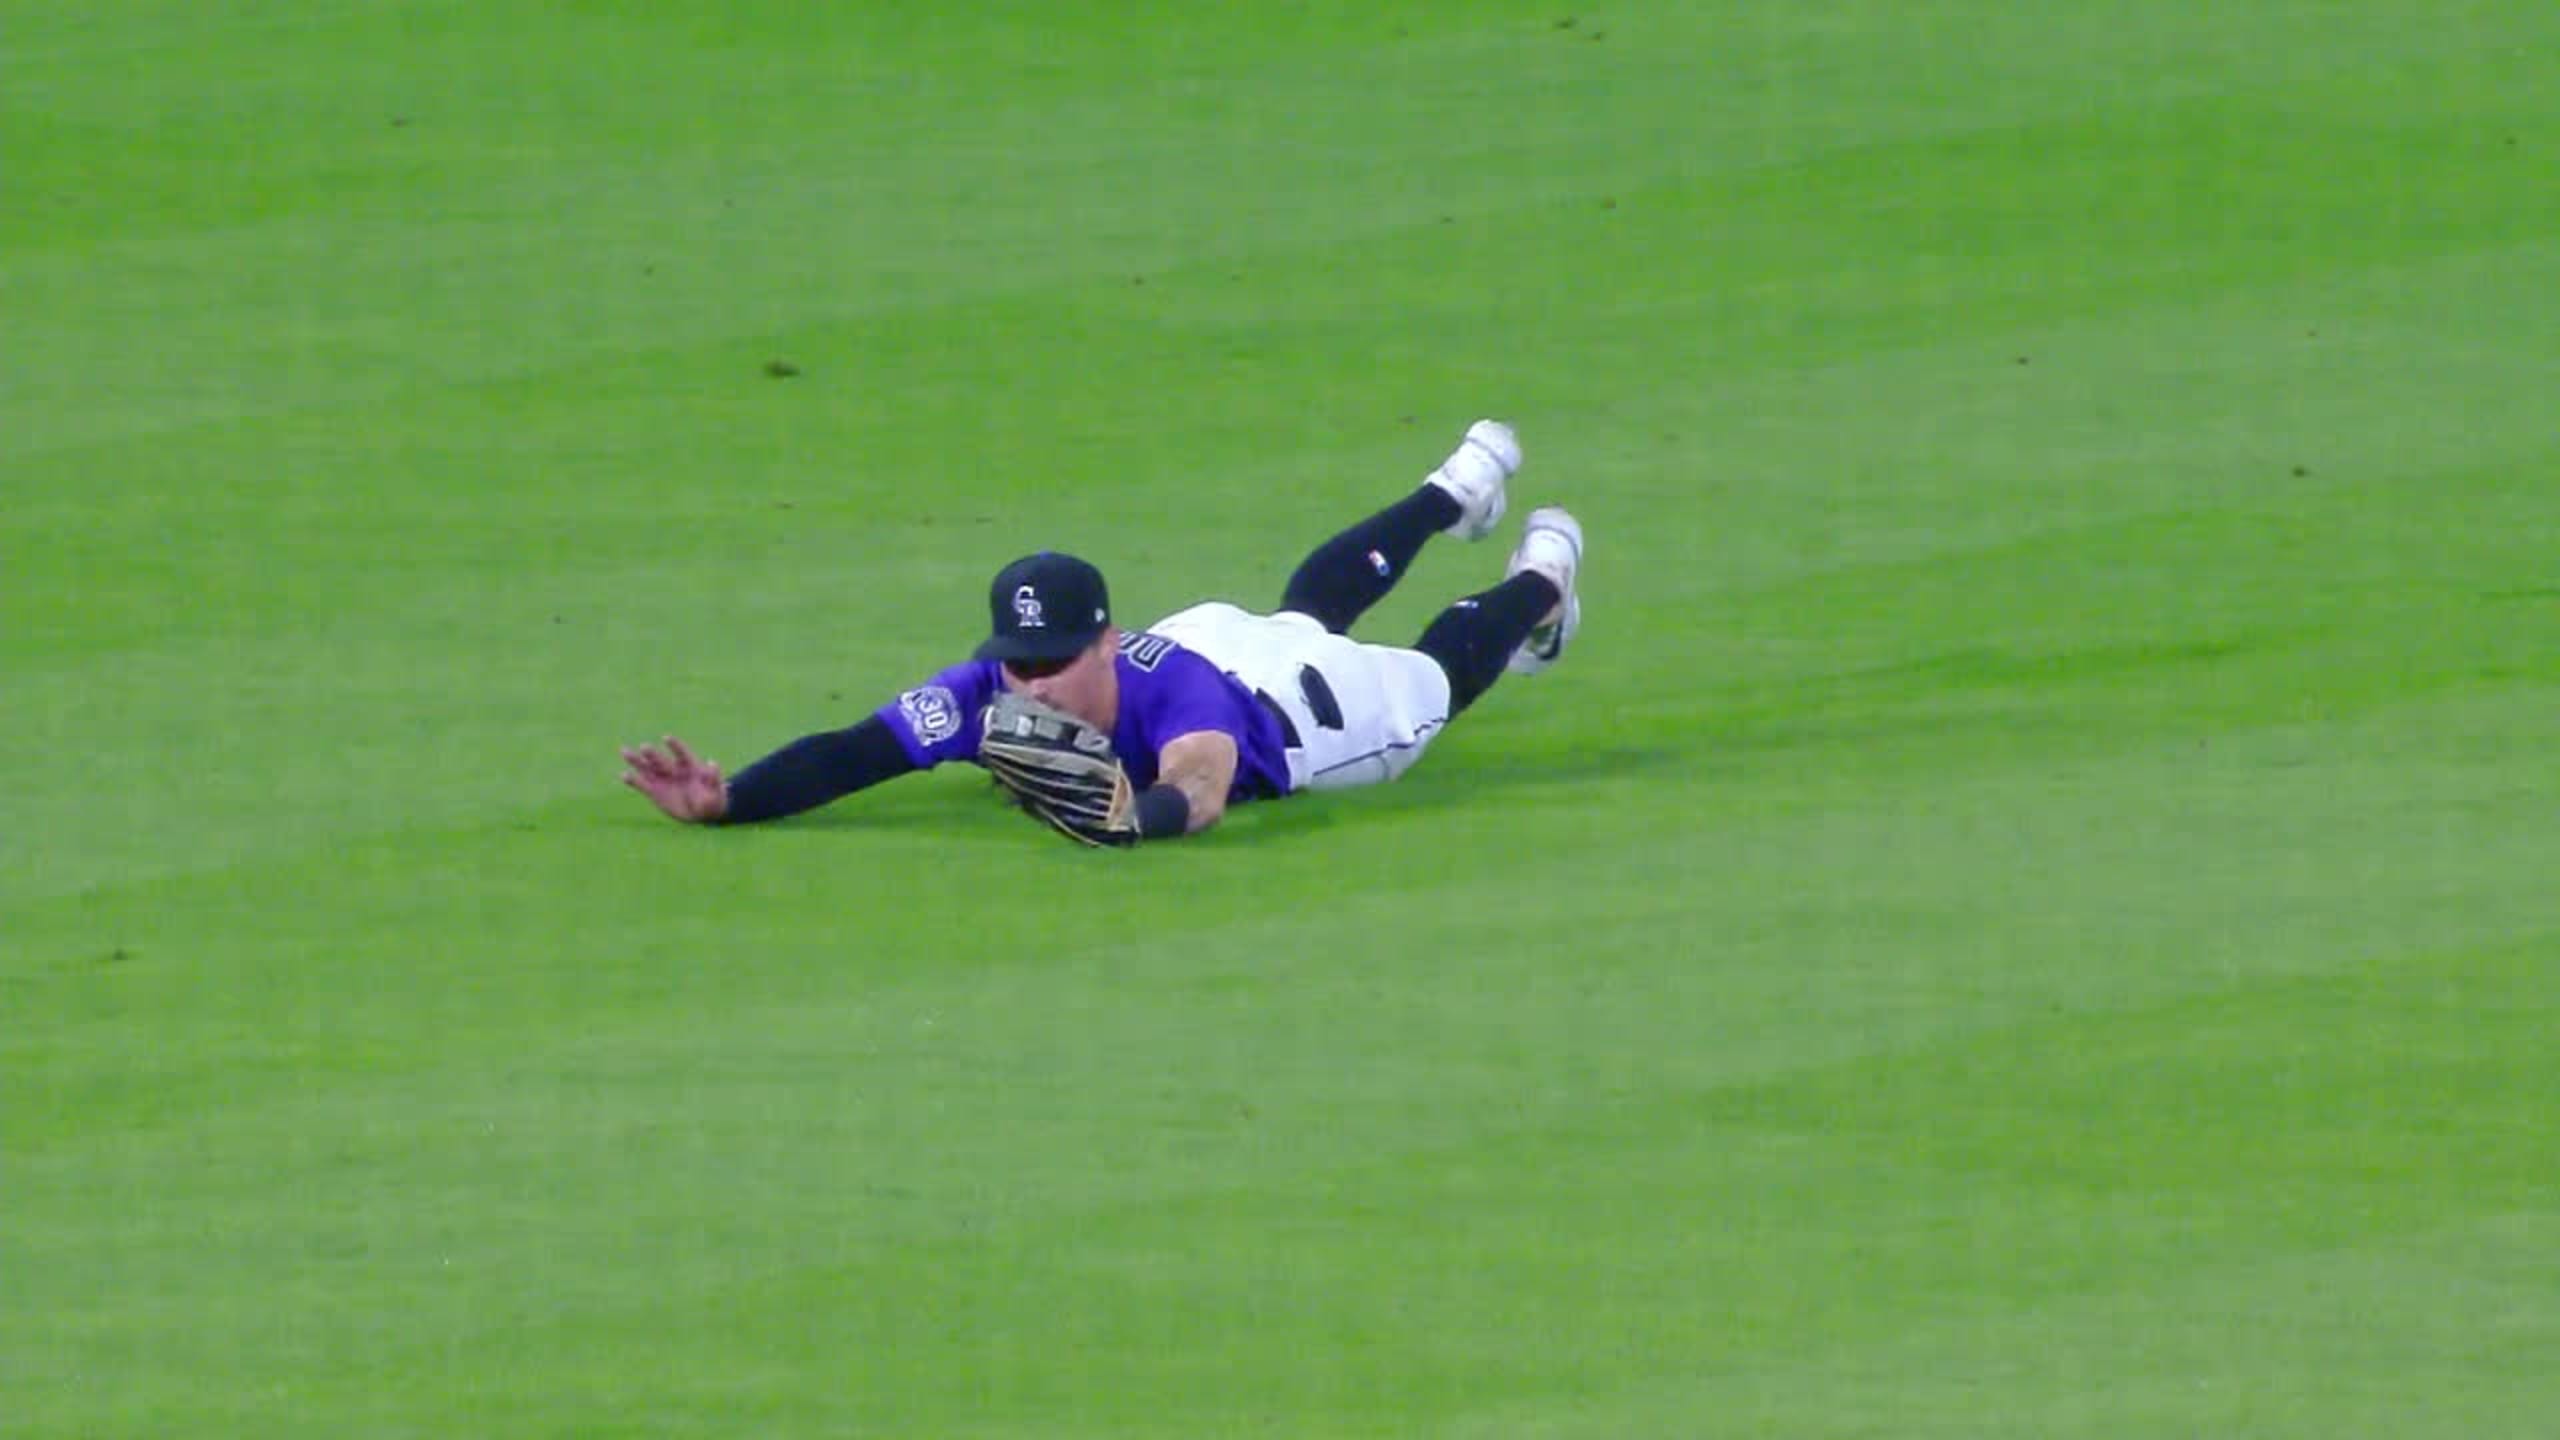 Colorado Rockies News: How good is the Rockies' outfield defense